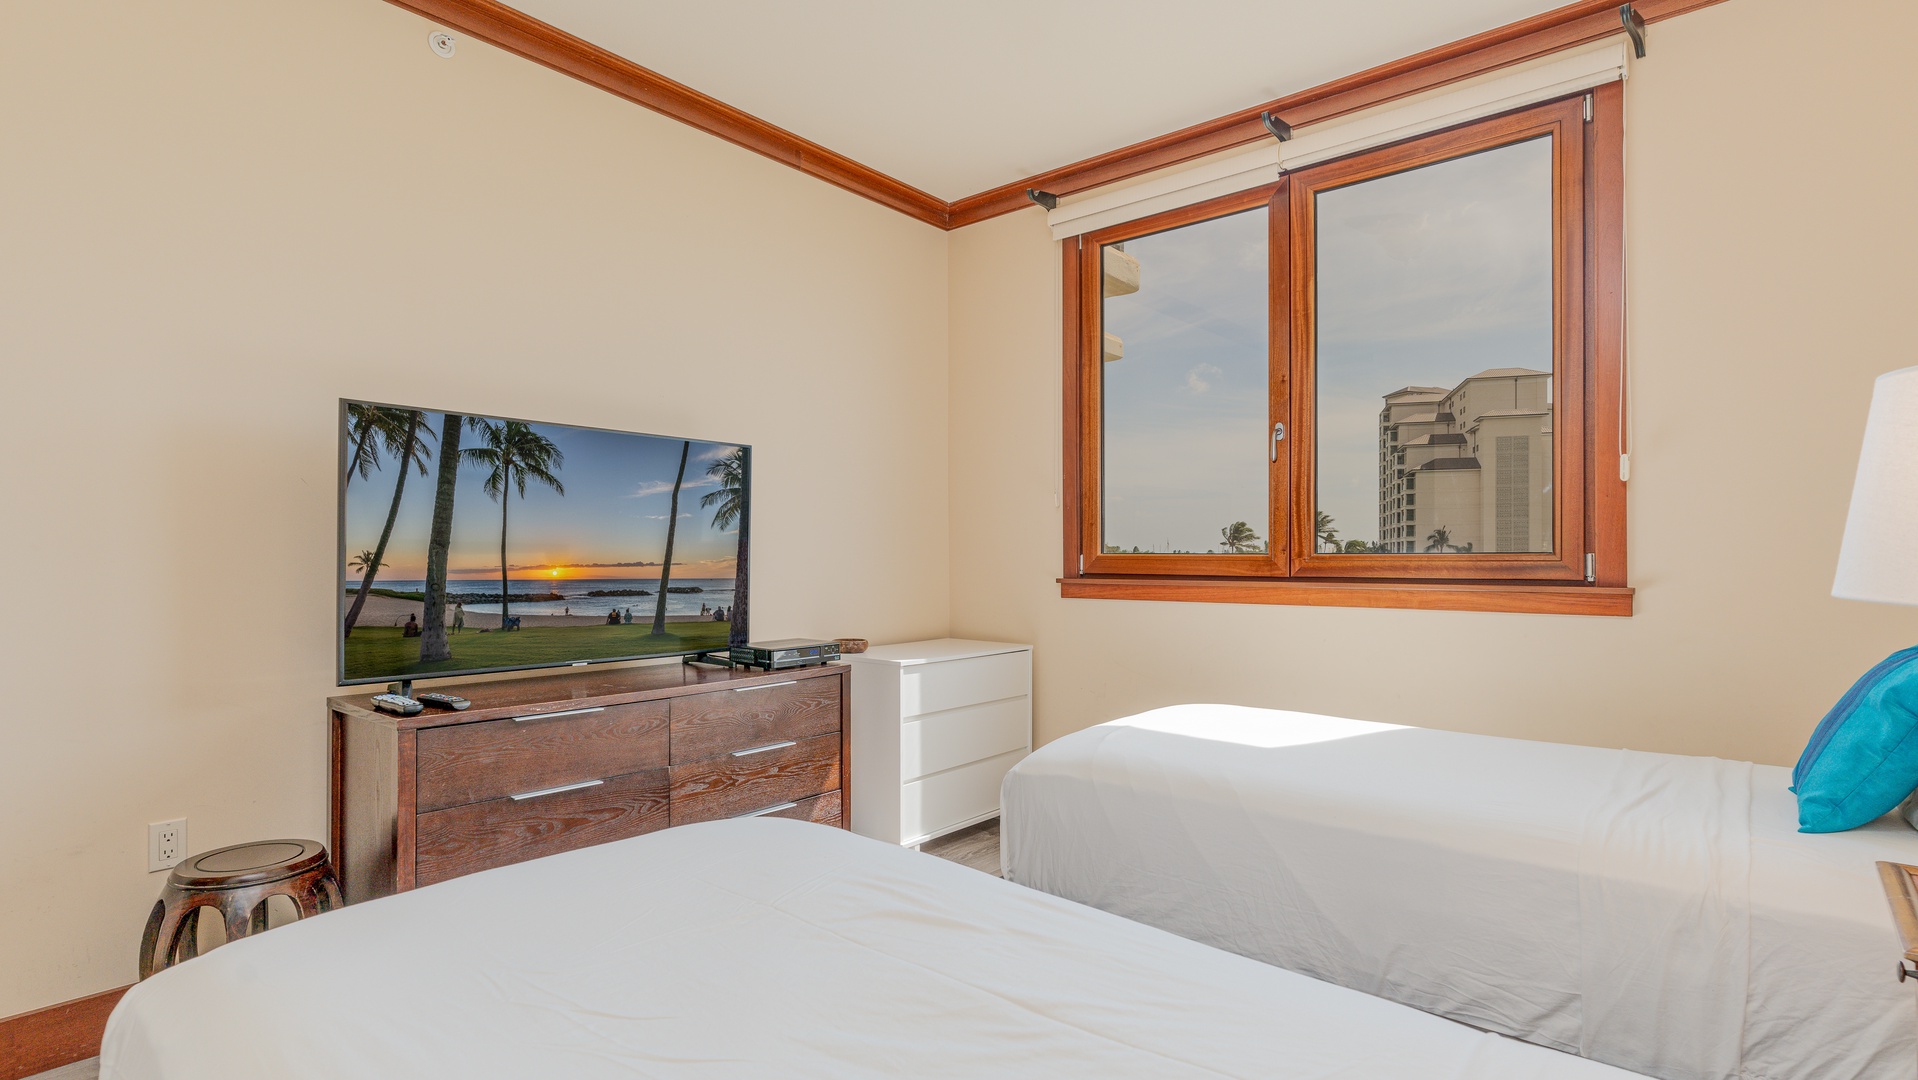 Kapolei Vacation Rentals, Ko Olina Beach Villas O425 - The second guest bedroom has a TV and a view.